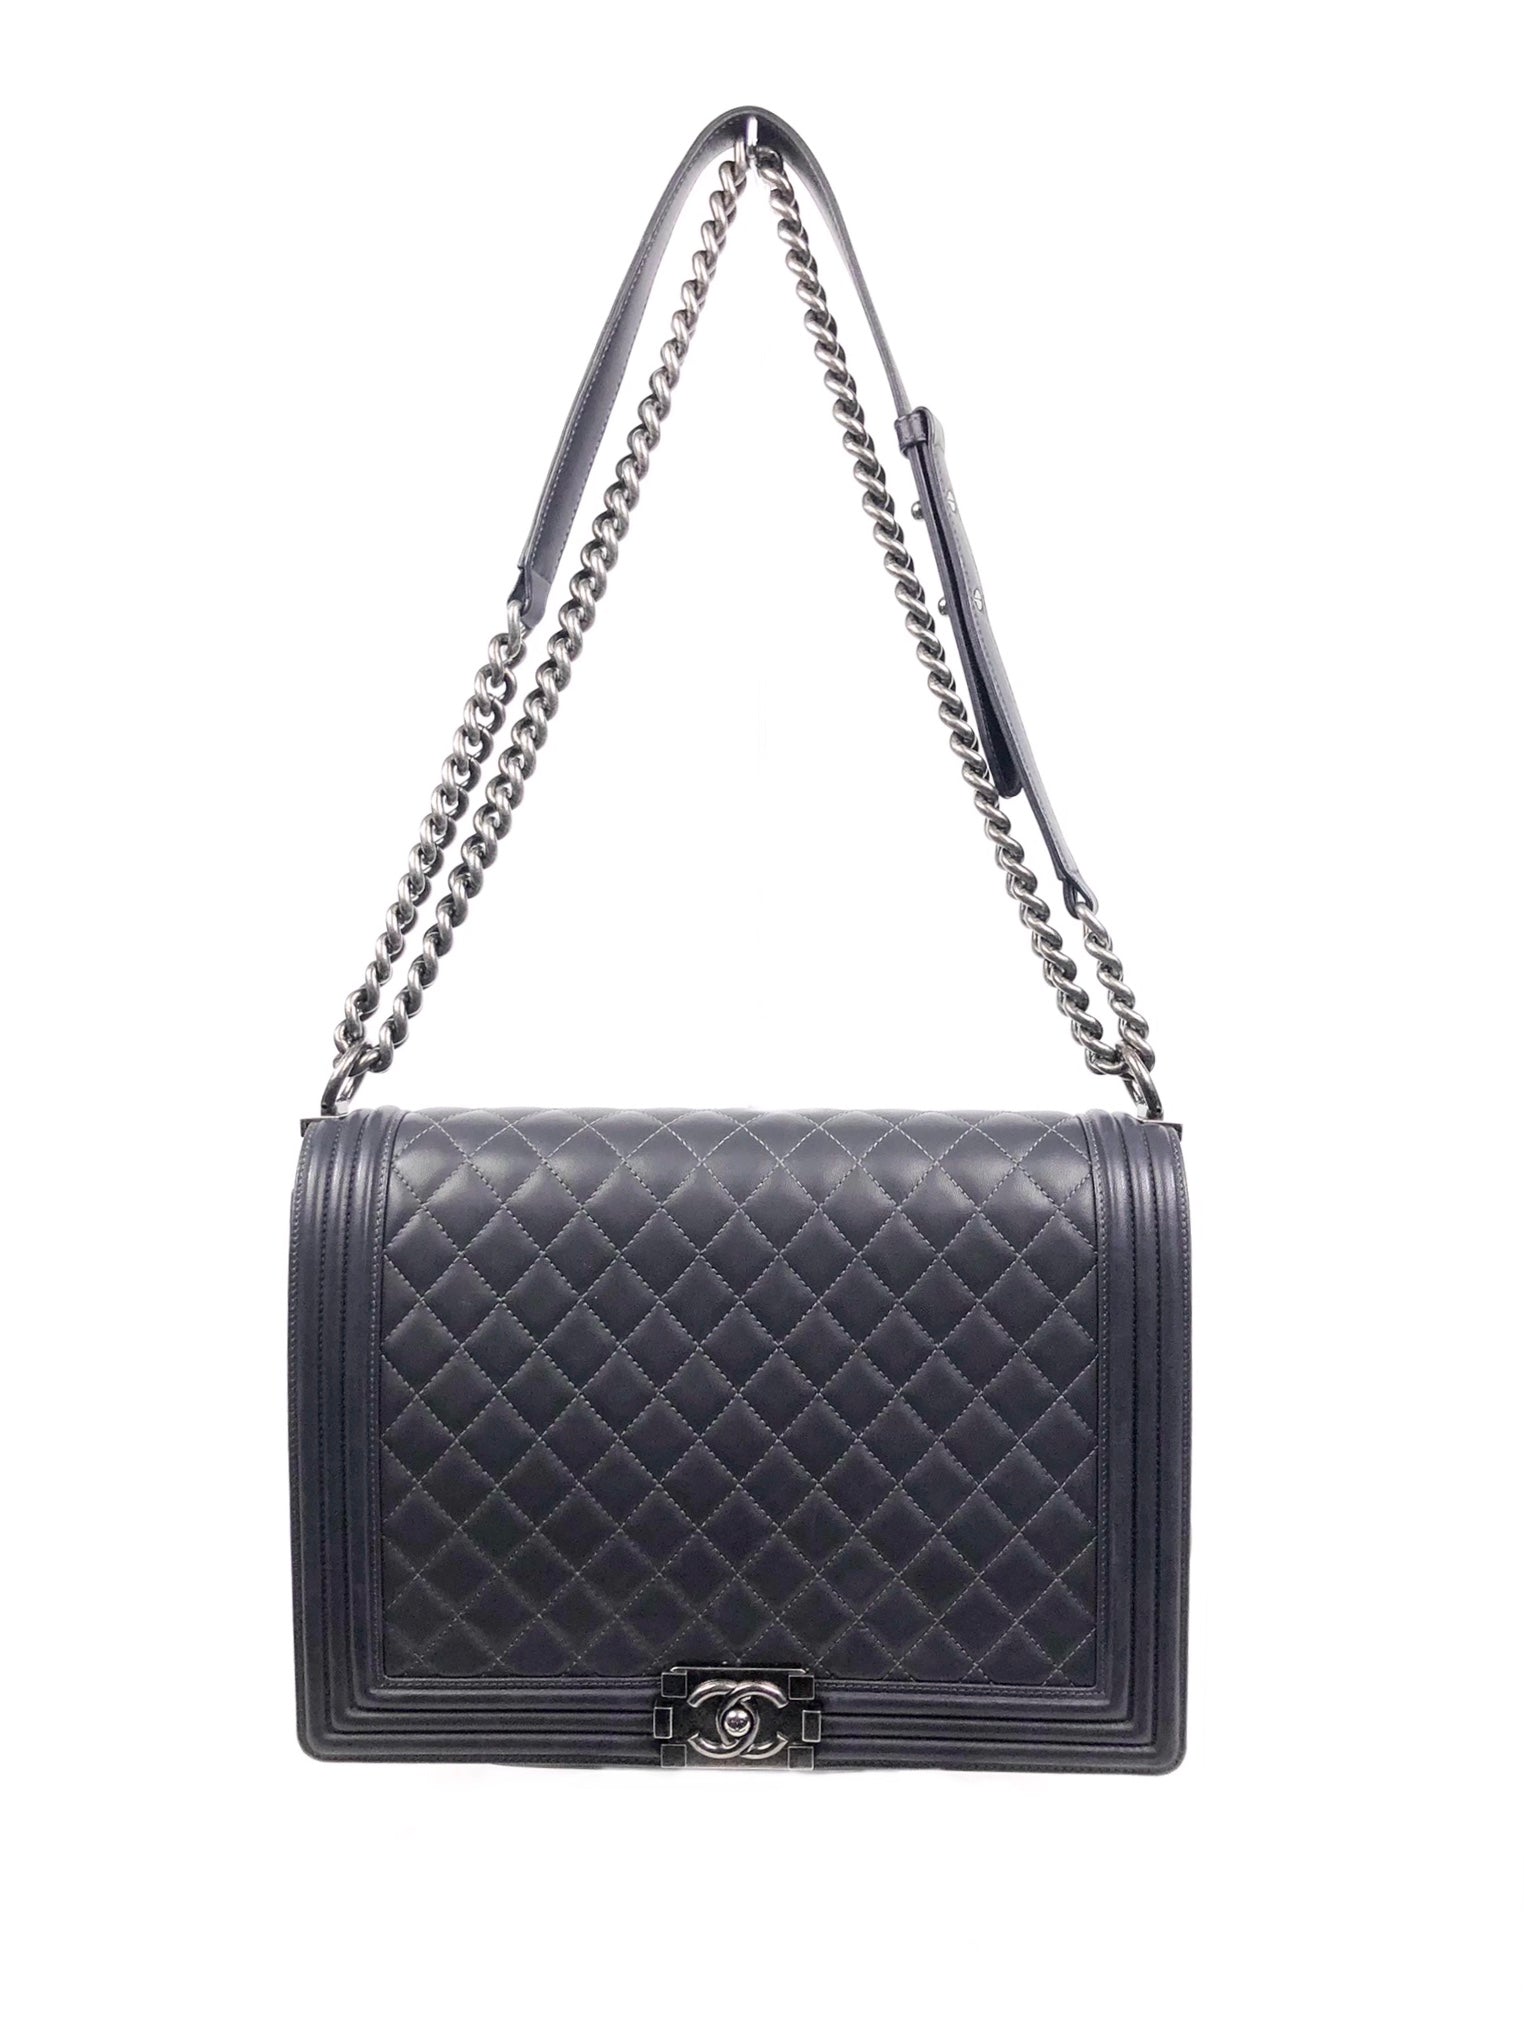 Chanel So Black Boy Flap Bag Quilted Lambskin Small Gray 2409641